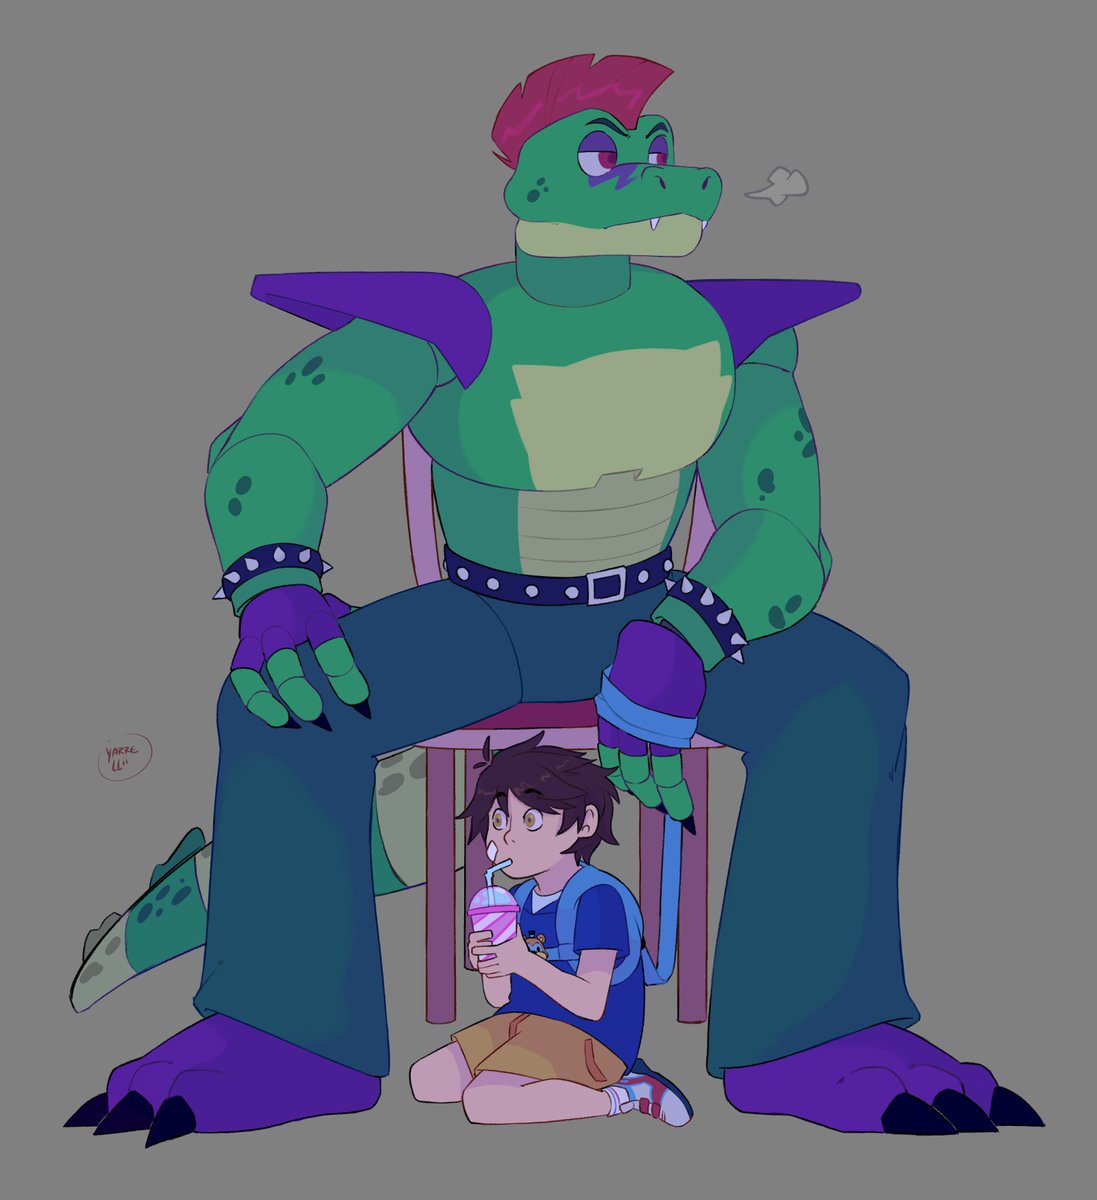 taking care of the brat #fnaf #fnafsecuritybreach #montgomerygator